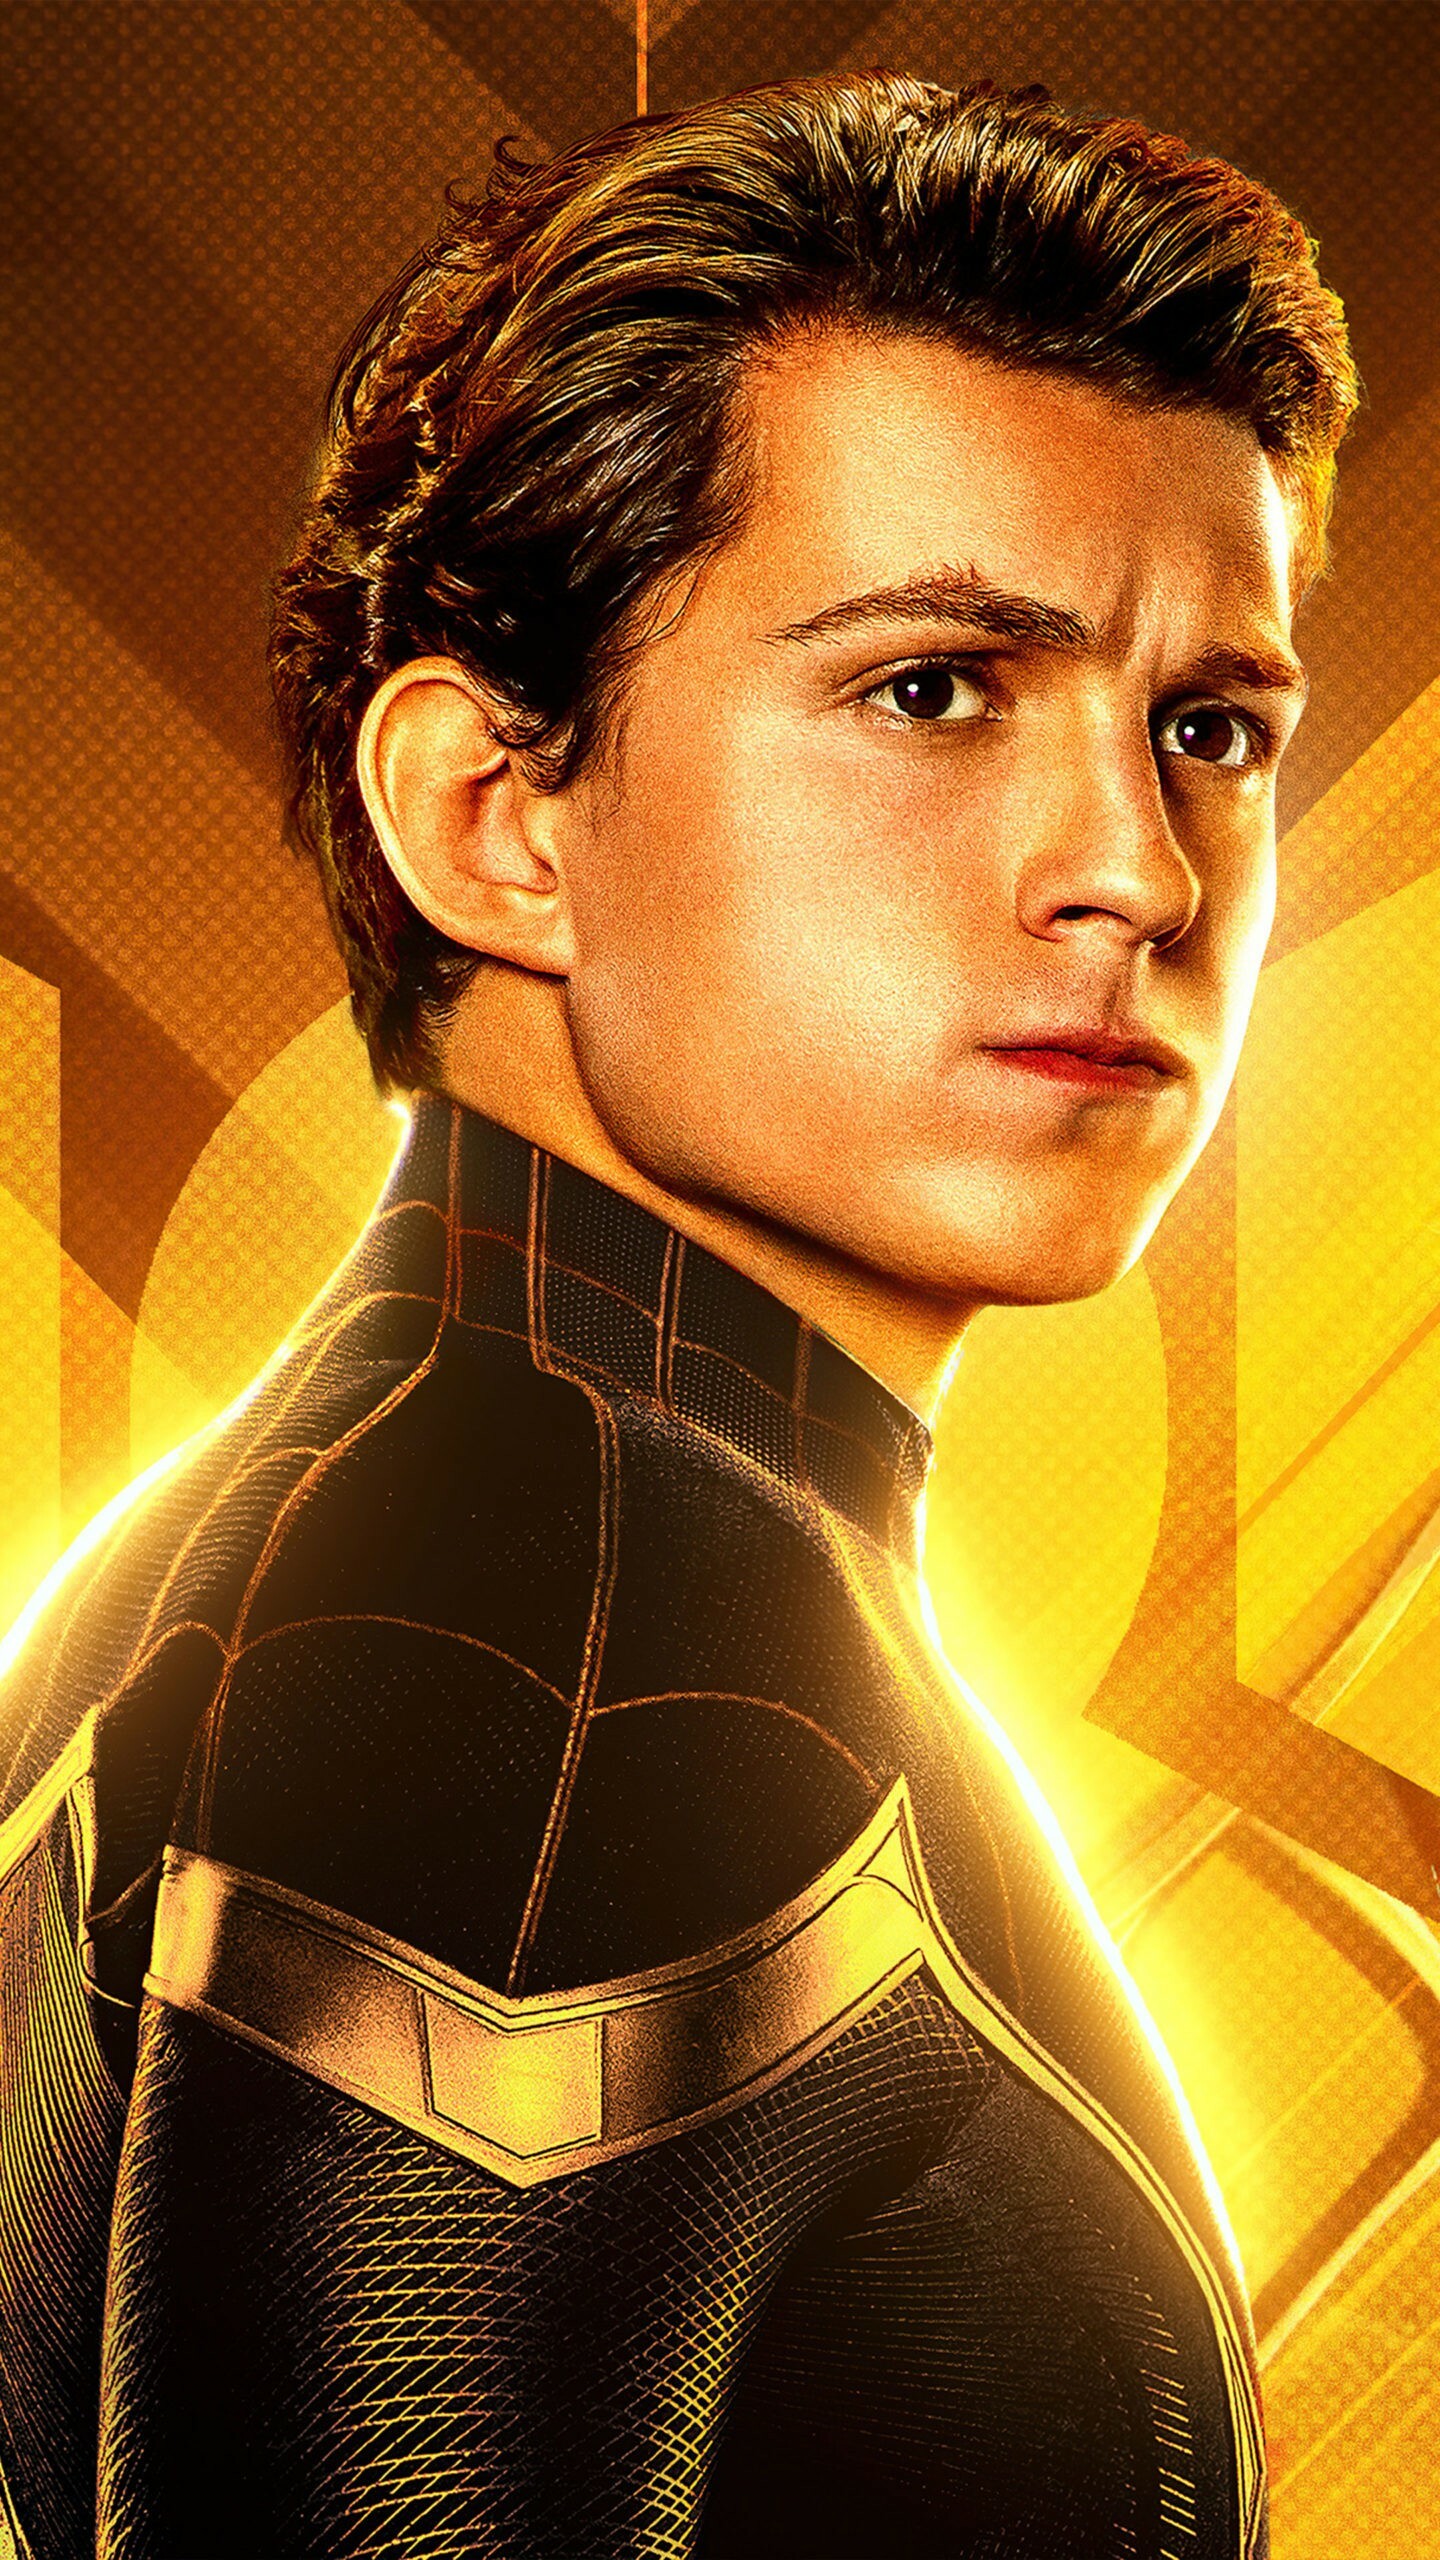 Spider-Man: No Way Home: Tom Holland as Peter Parker, The highest grossing Spider-Man film. 1440x2560 HD Wallpaper.